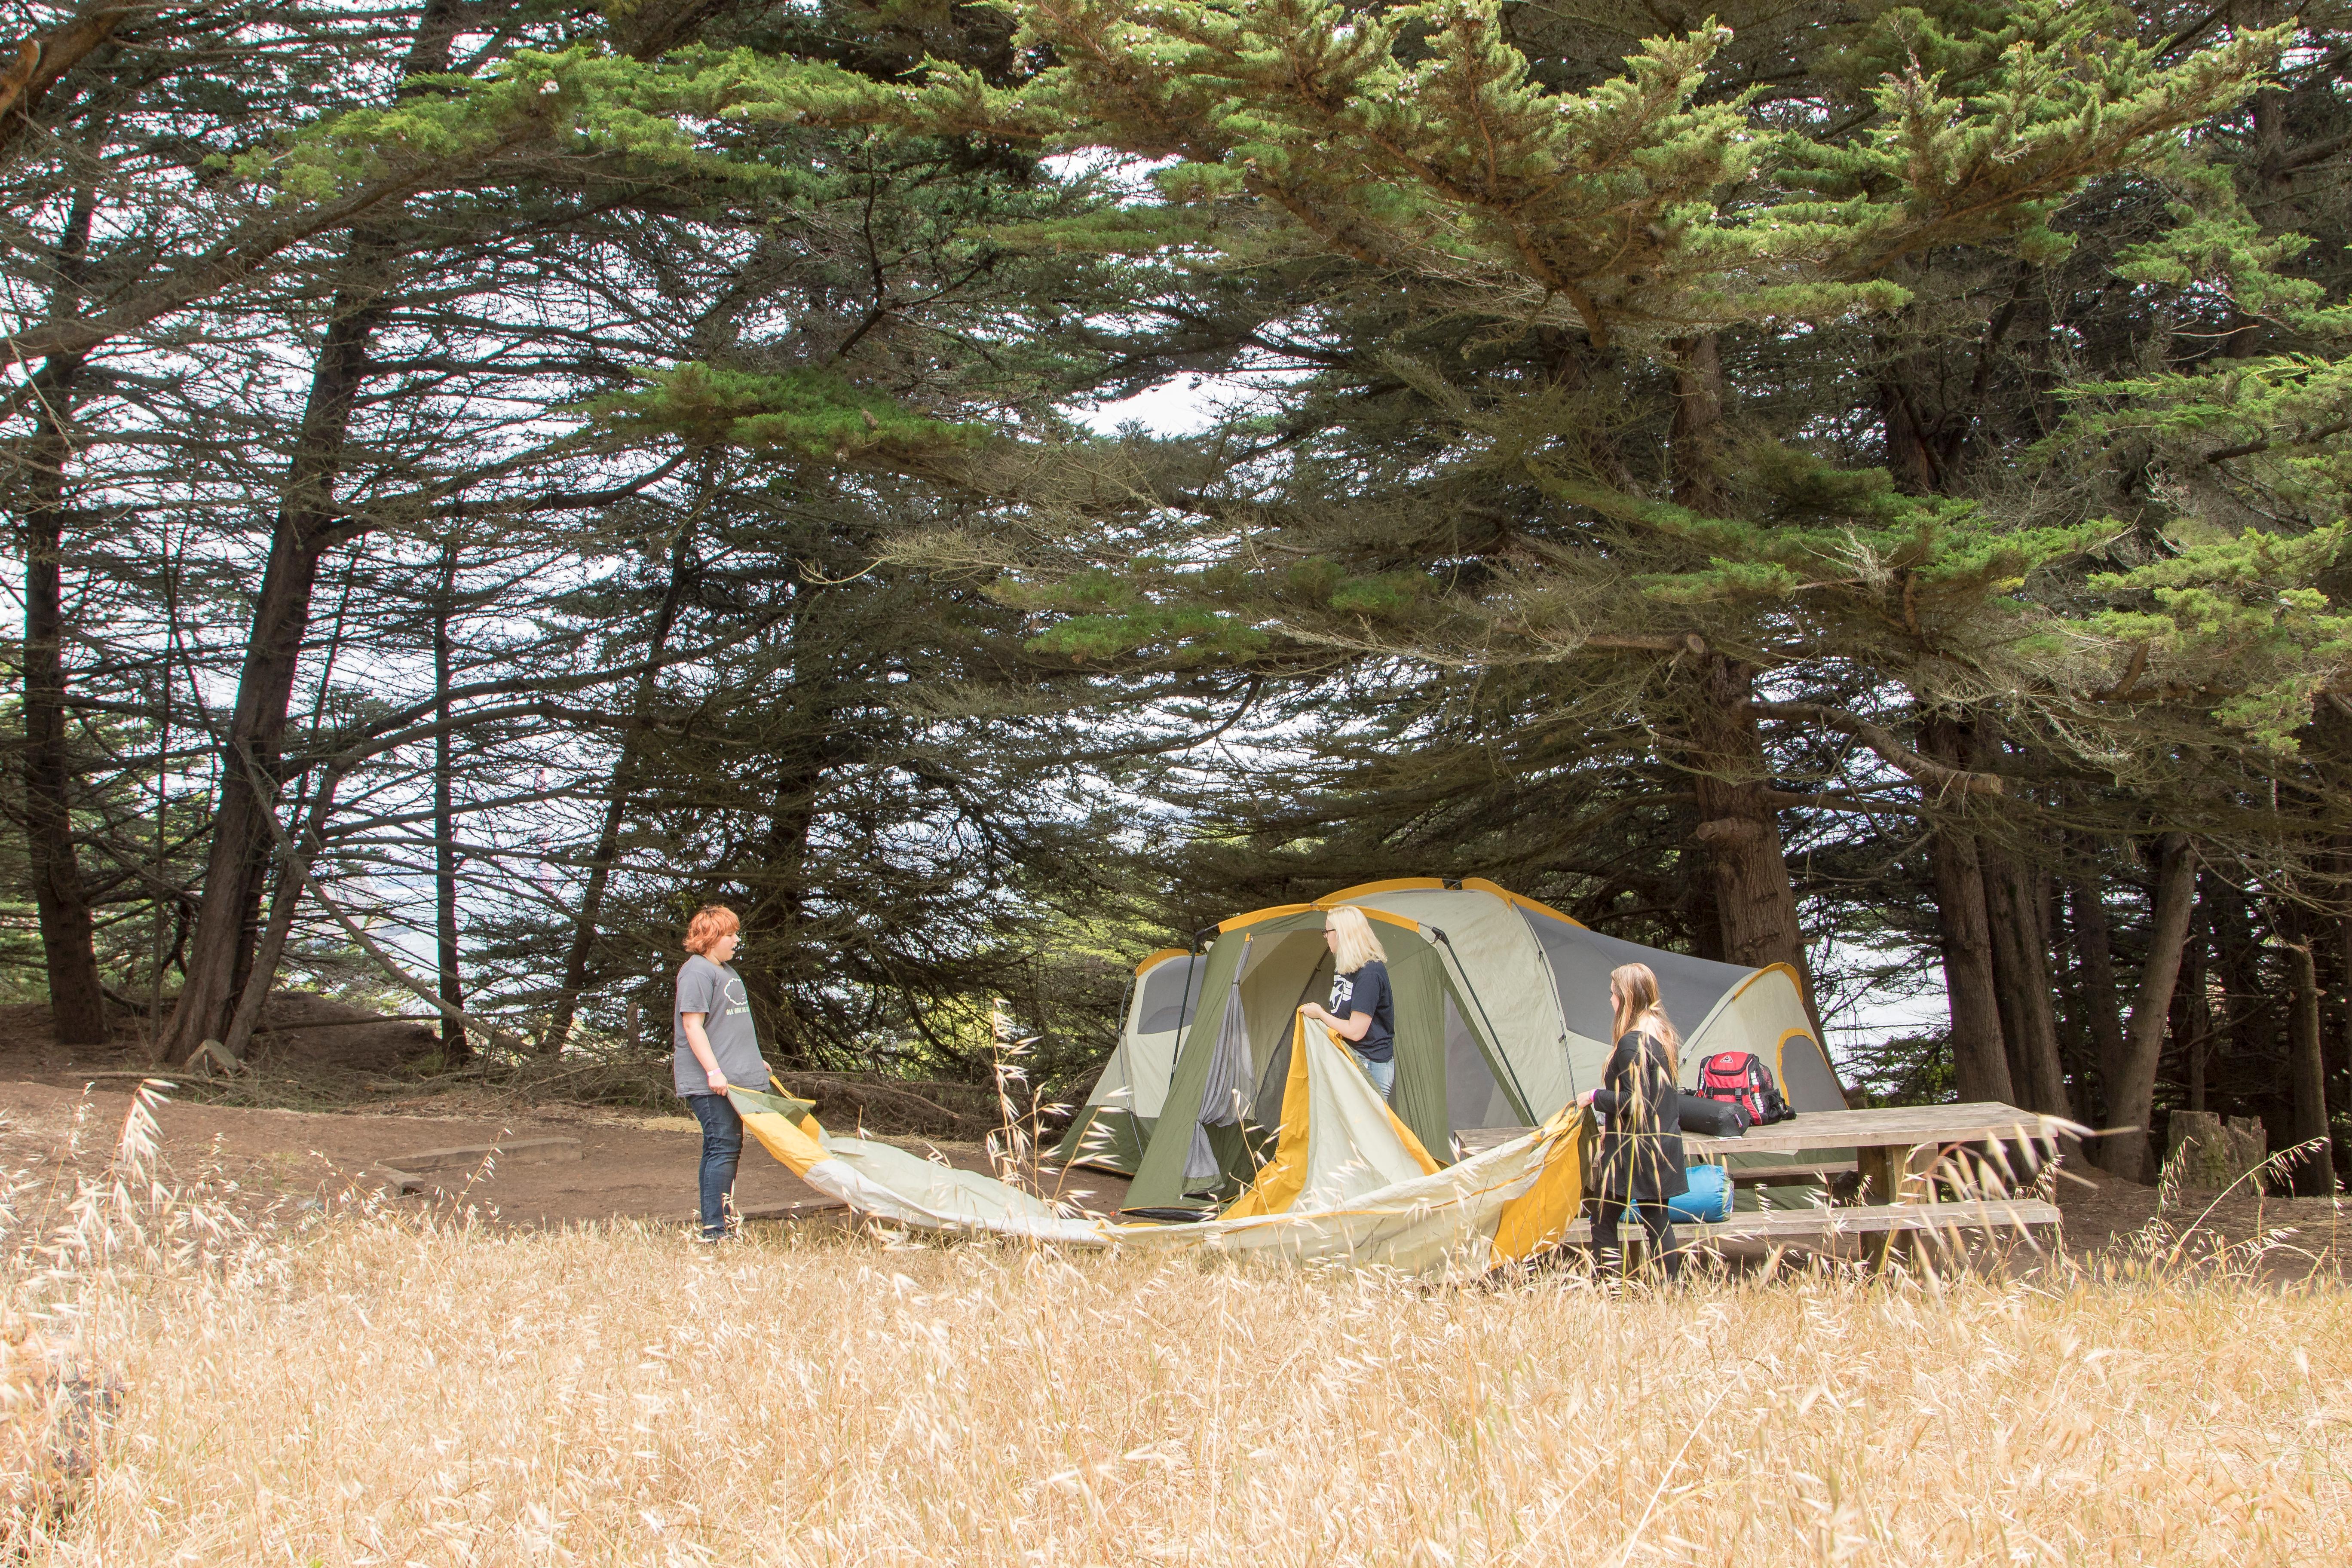 Campers set up a tent in a dry, grassy field with green cypresses behind them.